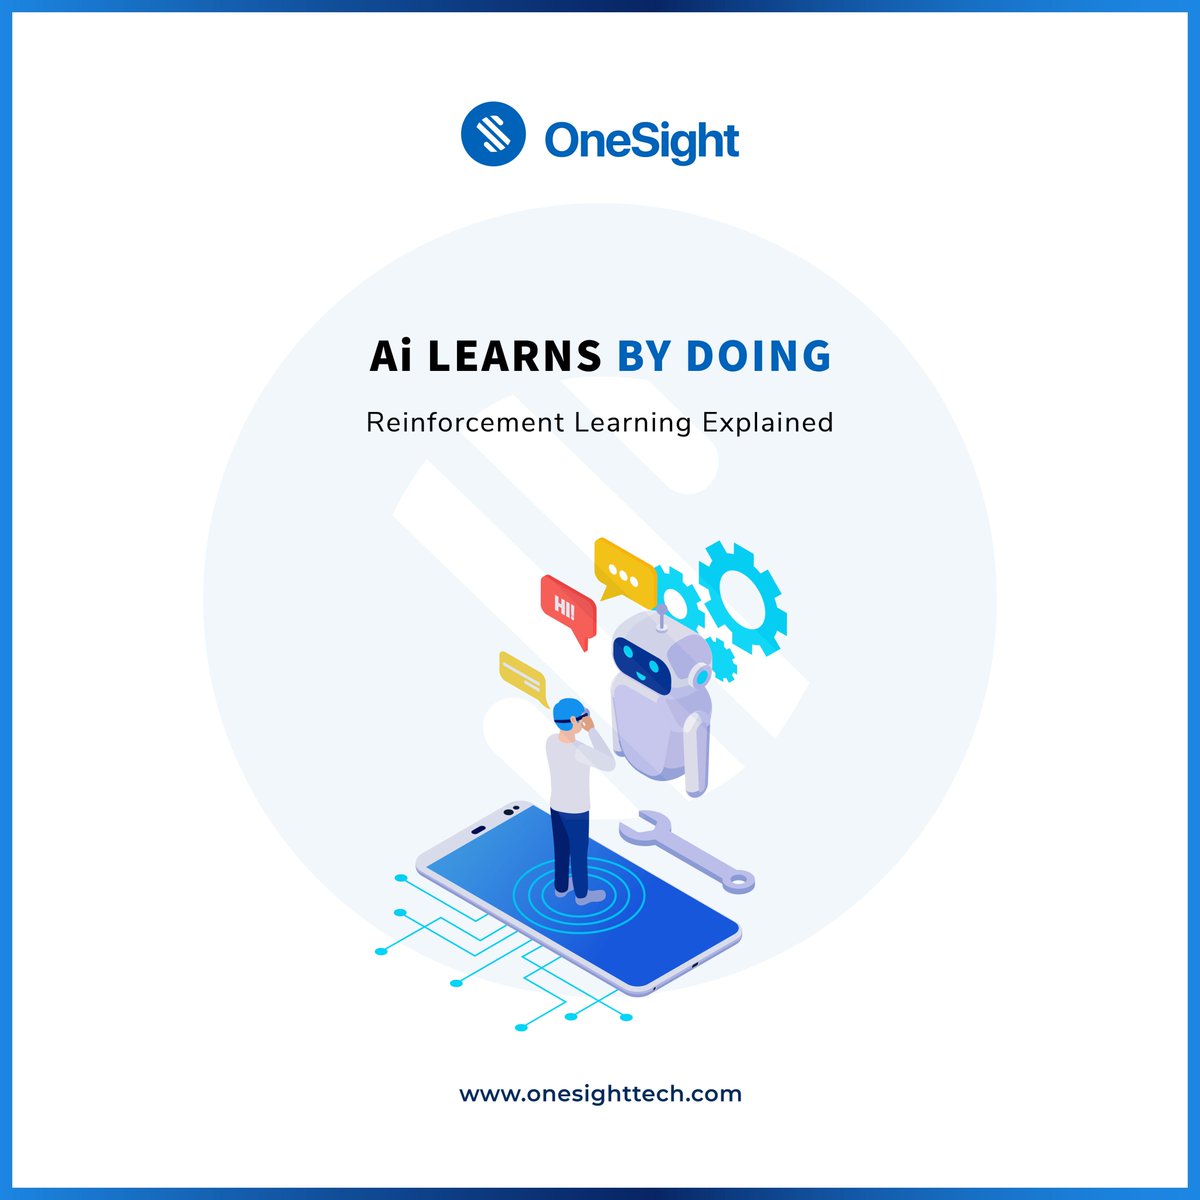 AI that Learns on its Own? Introducing Reinforcement Learning! 🚀
Reinforcement learning (RL) is a type of AI where systems learn through trial and error, just like humans! 
#onesight #ai #TechnologyAndFuture #innovations 
#reinforcementlearning #ailearning #trialanderrorlearning